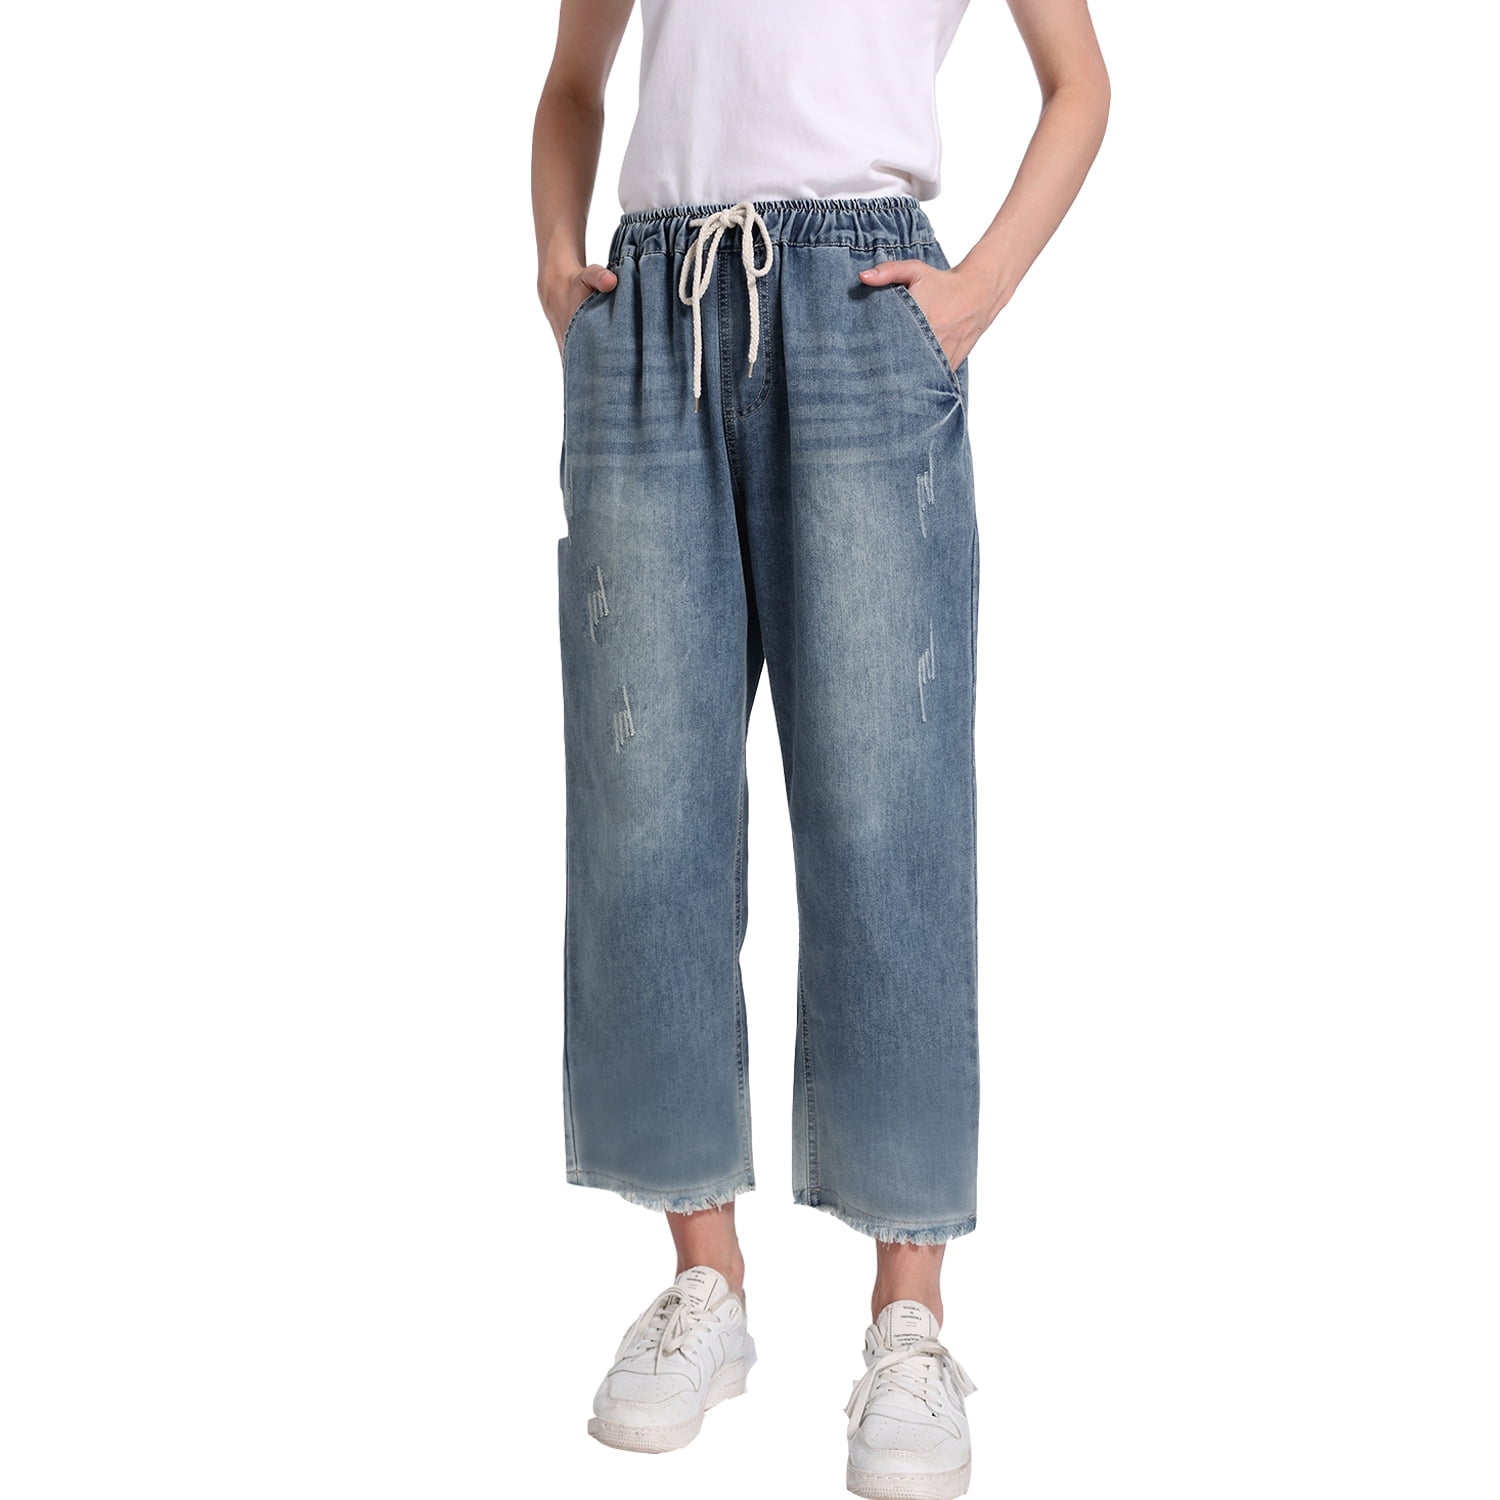 Women's Mid Rise Cargo Denim Pants with 6 Pockets Stretch Y2k